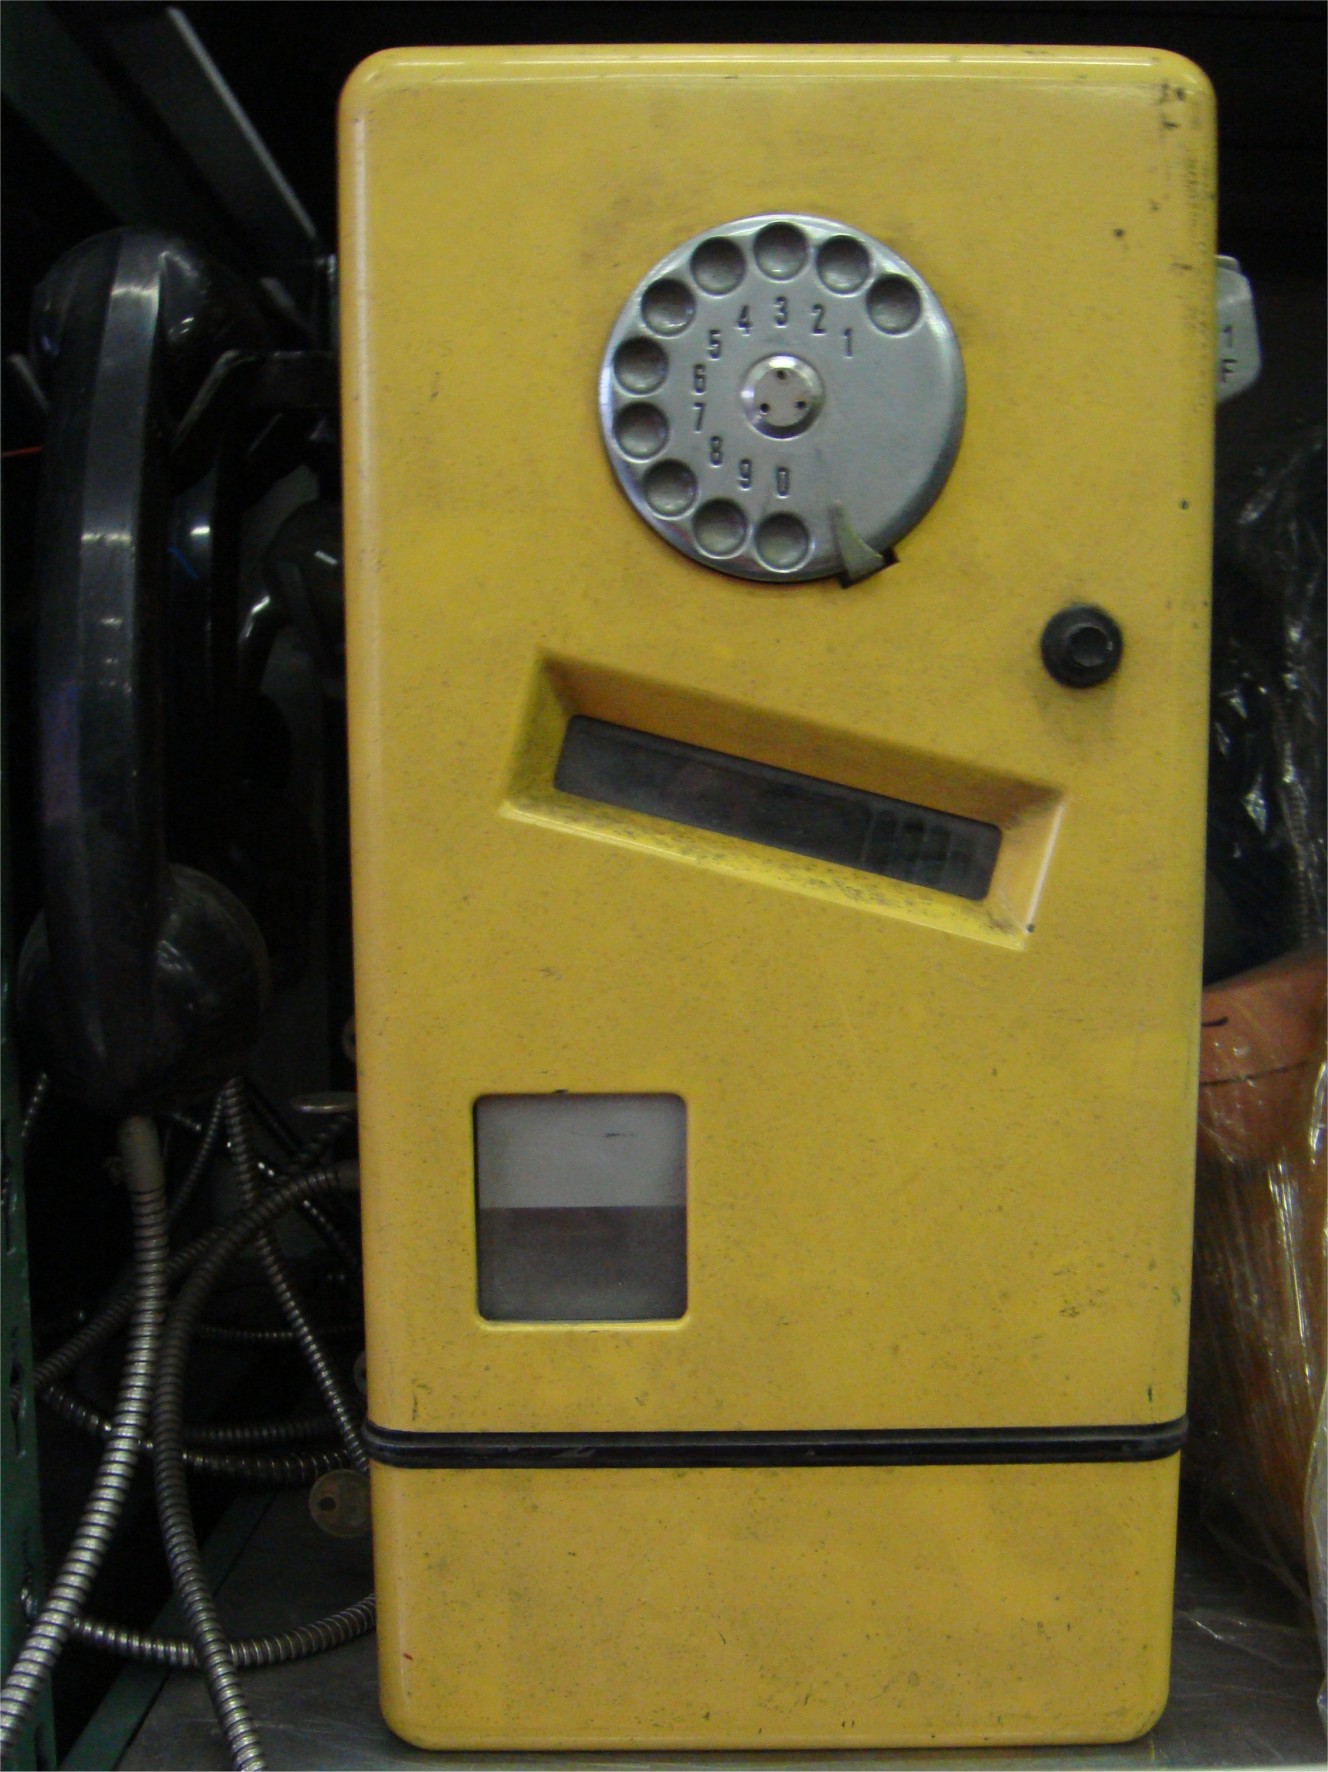 TaxiphoneTE432